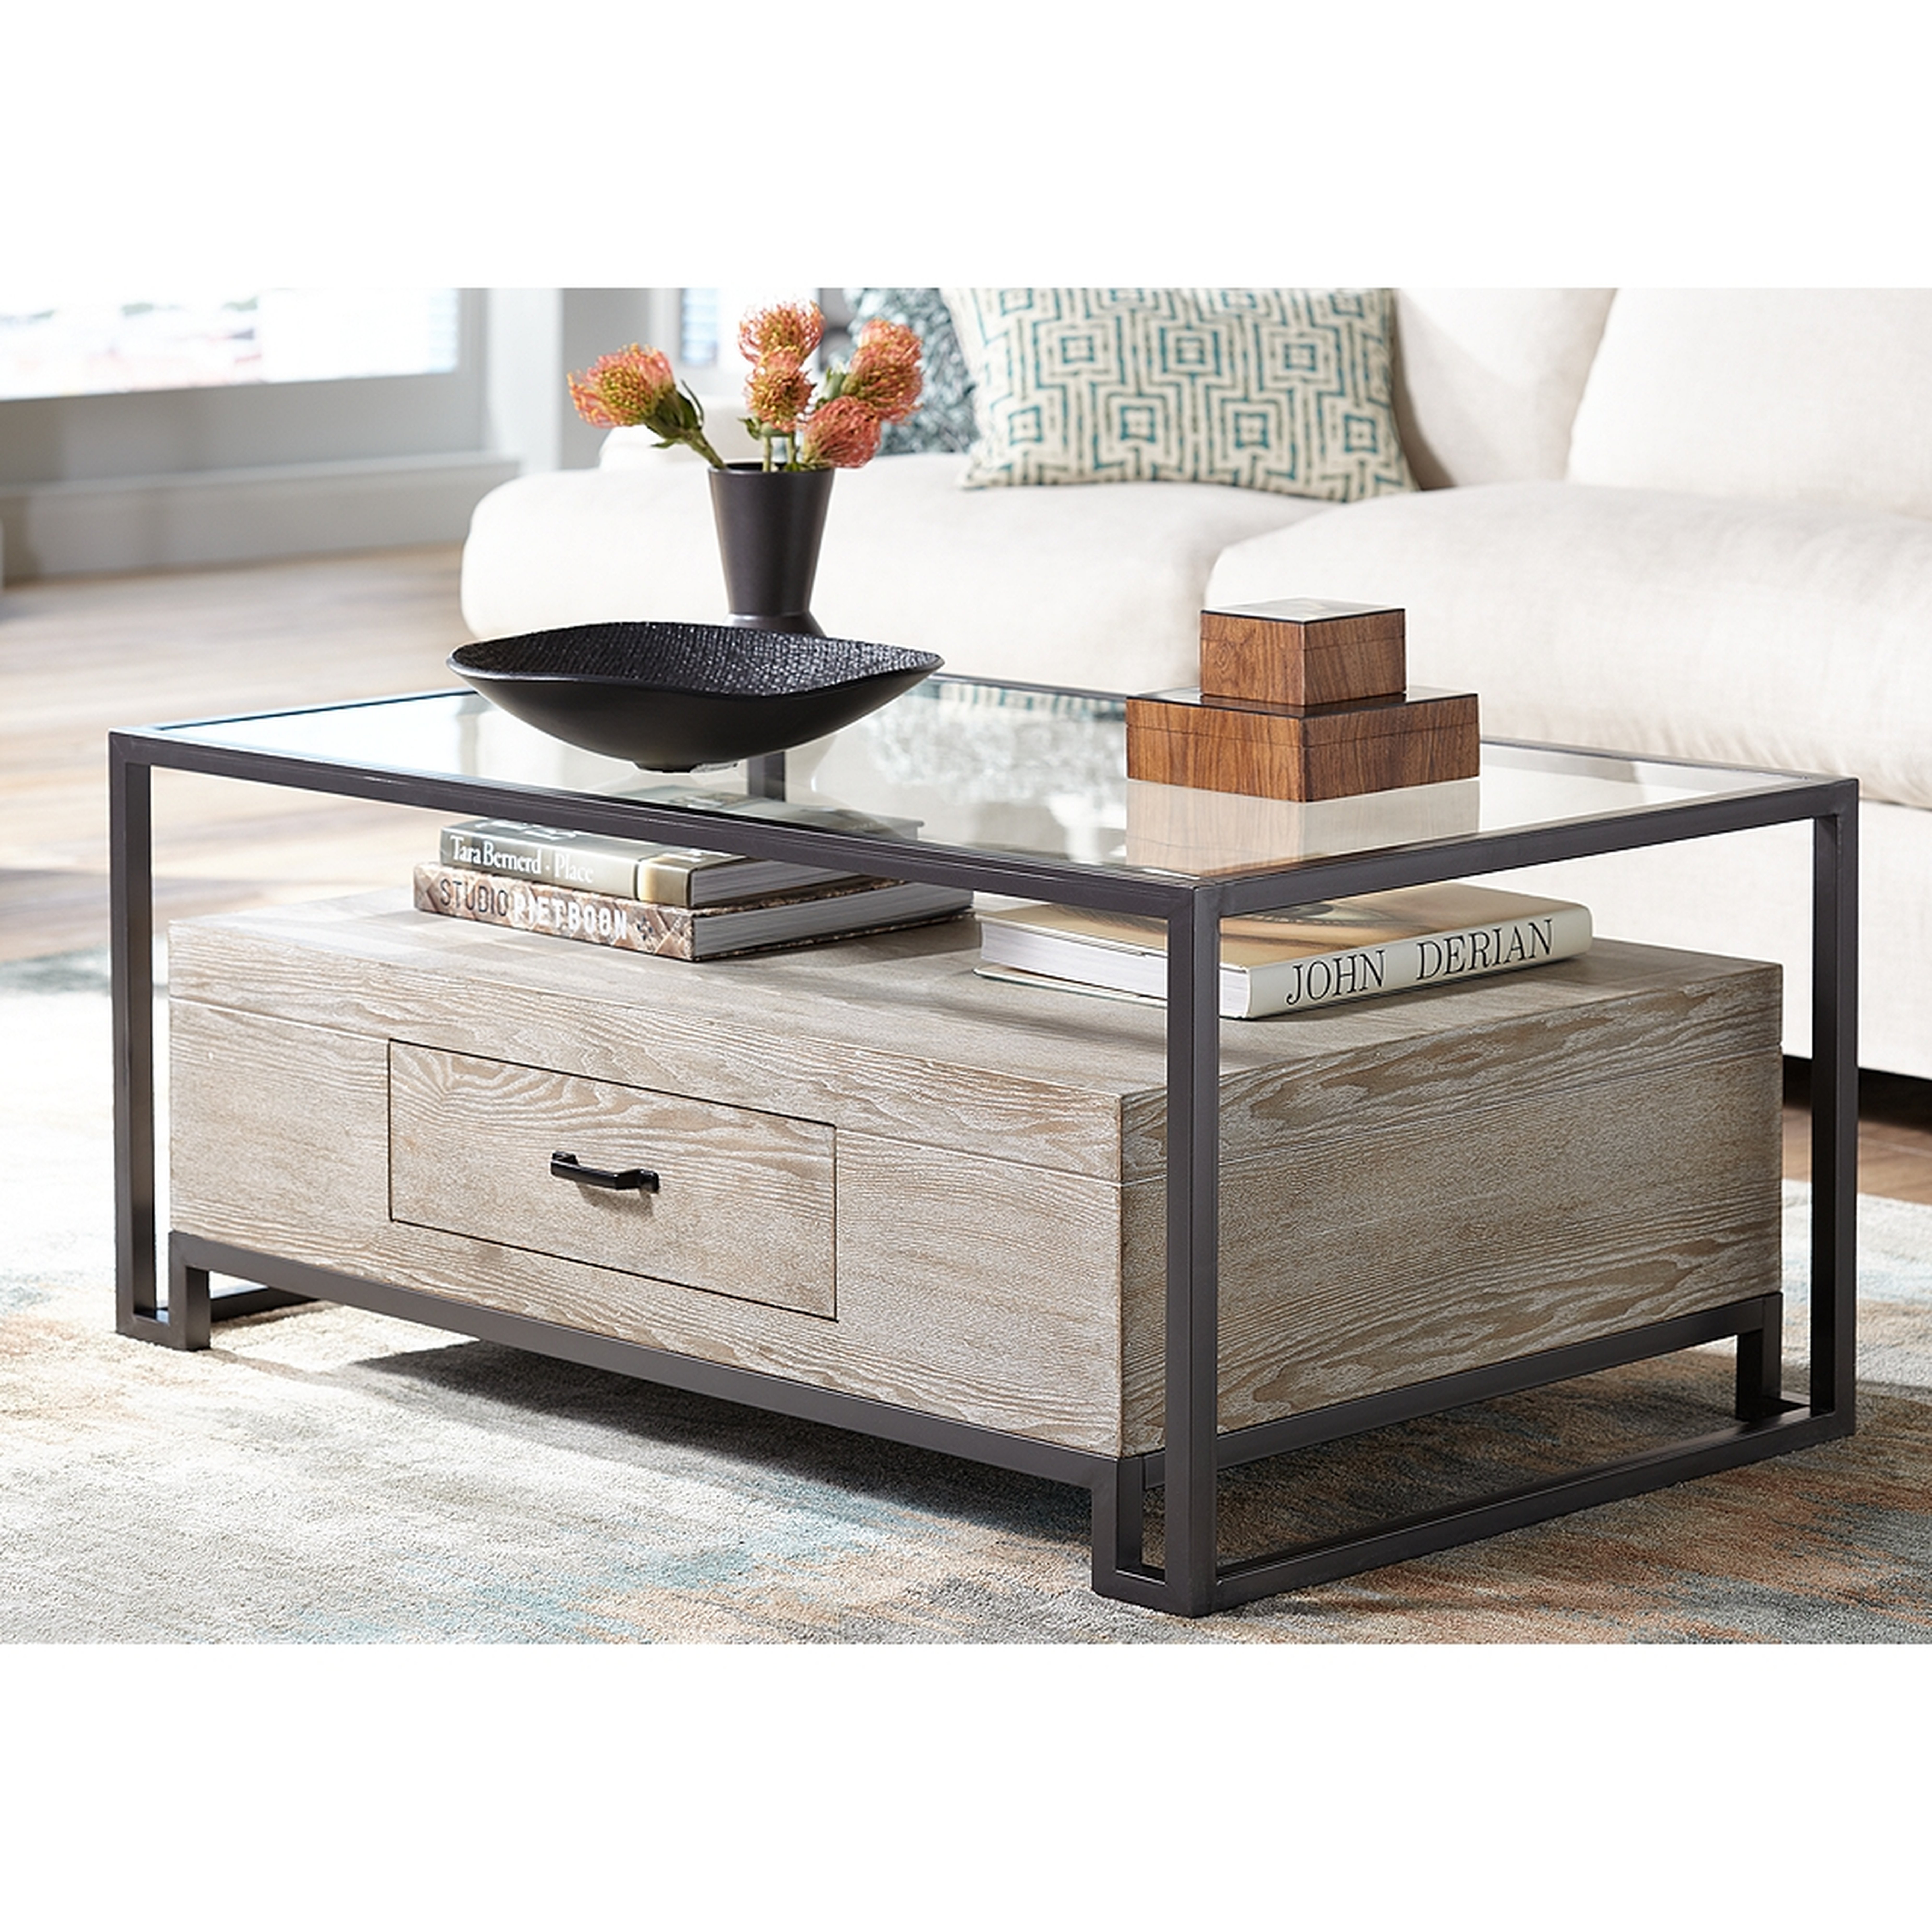 Liev Wood and Metal Coffee Table - Style # 32H83 - Lamps Plus